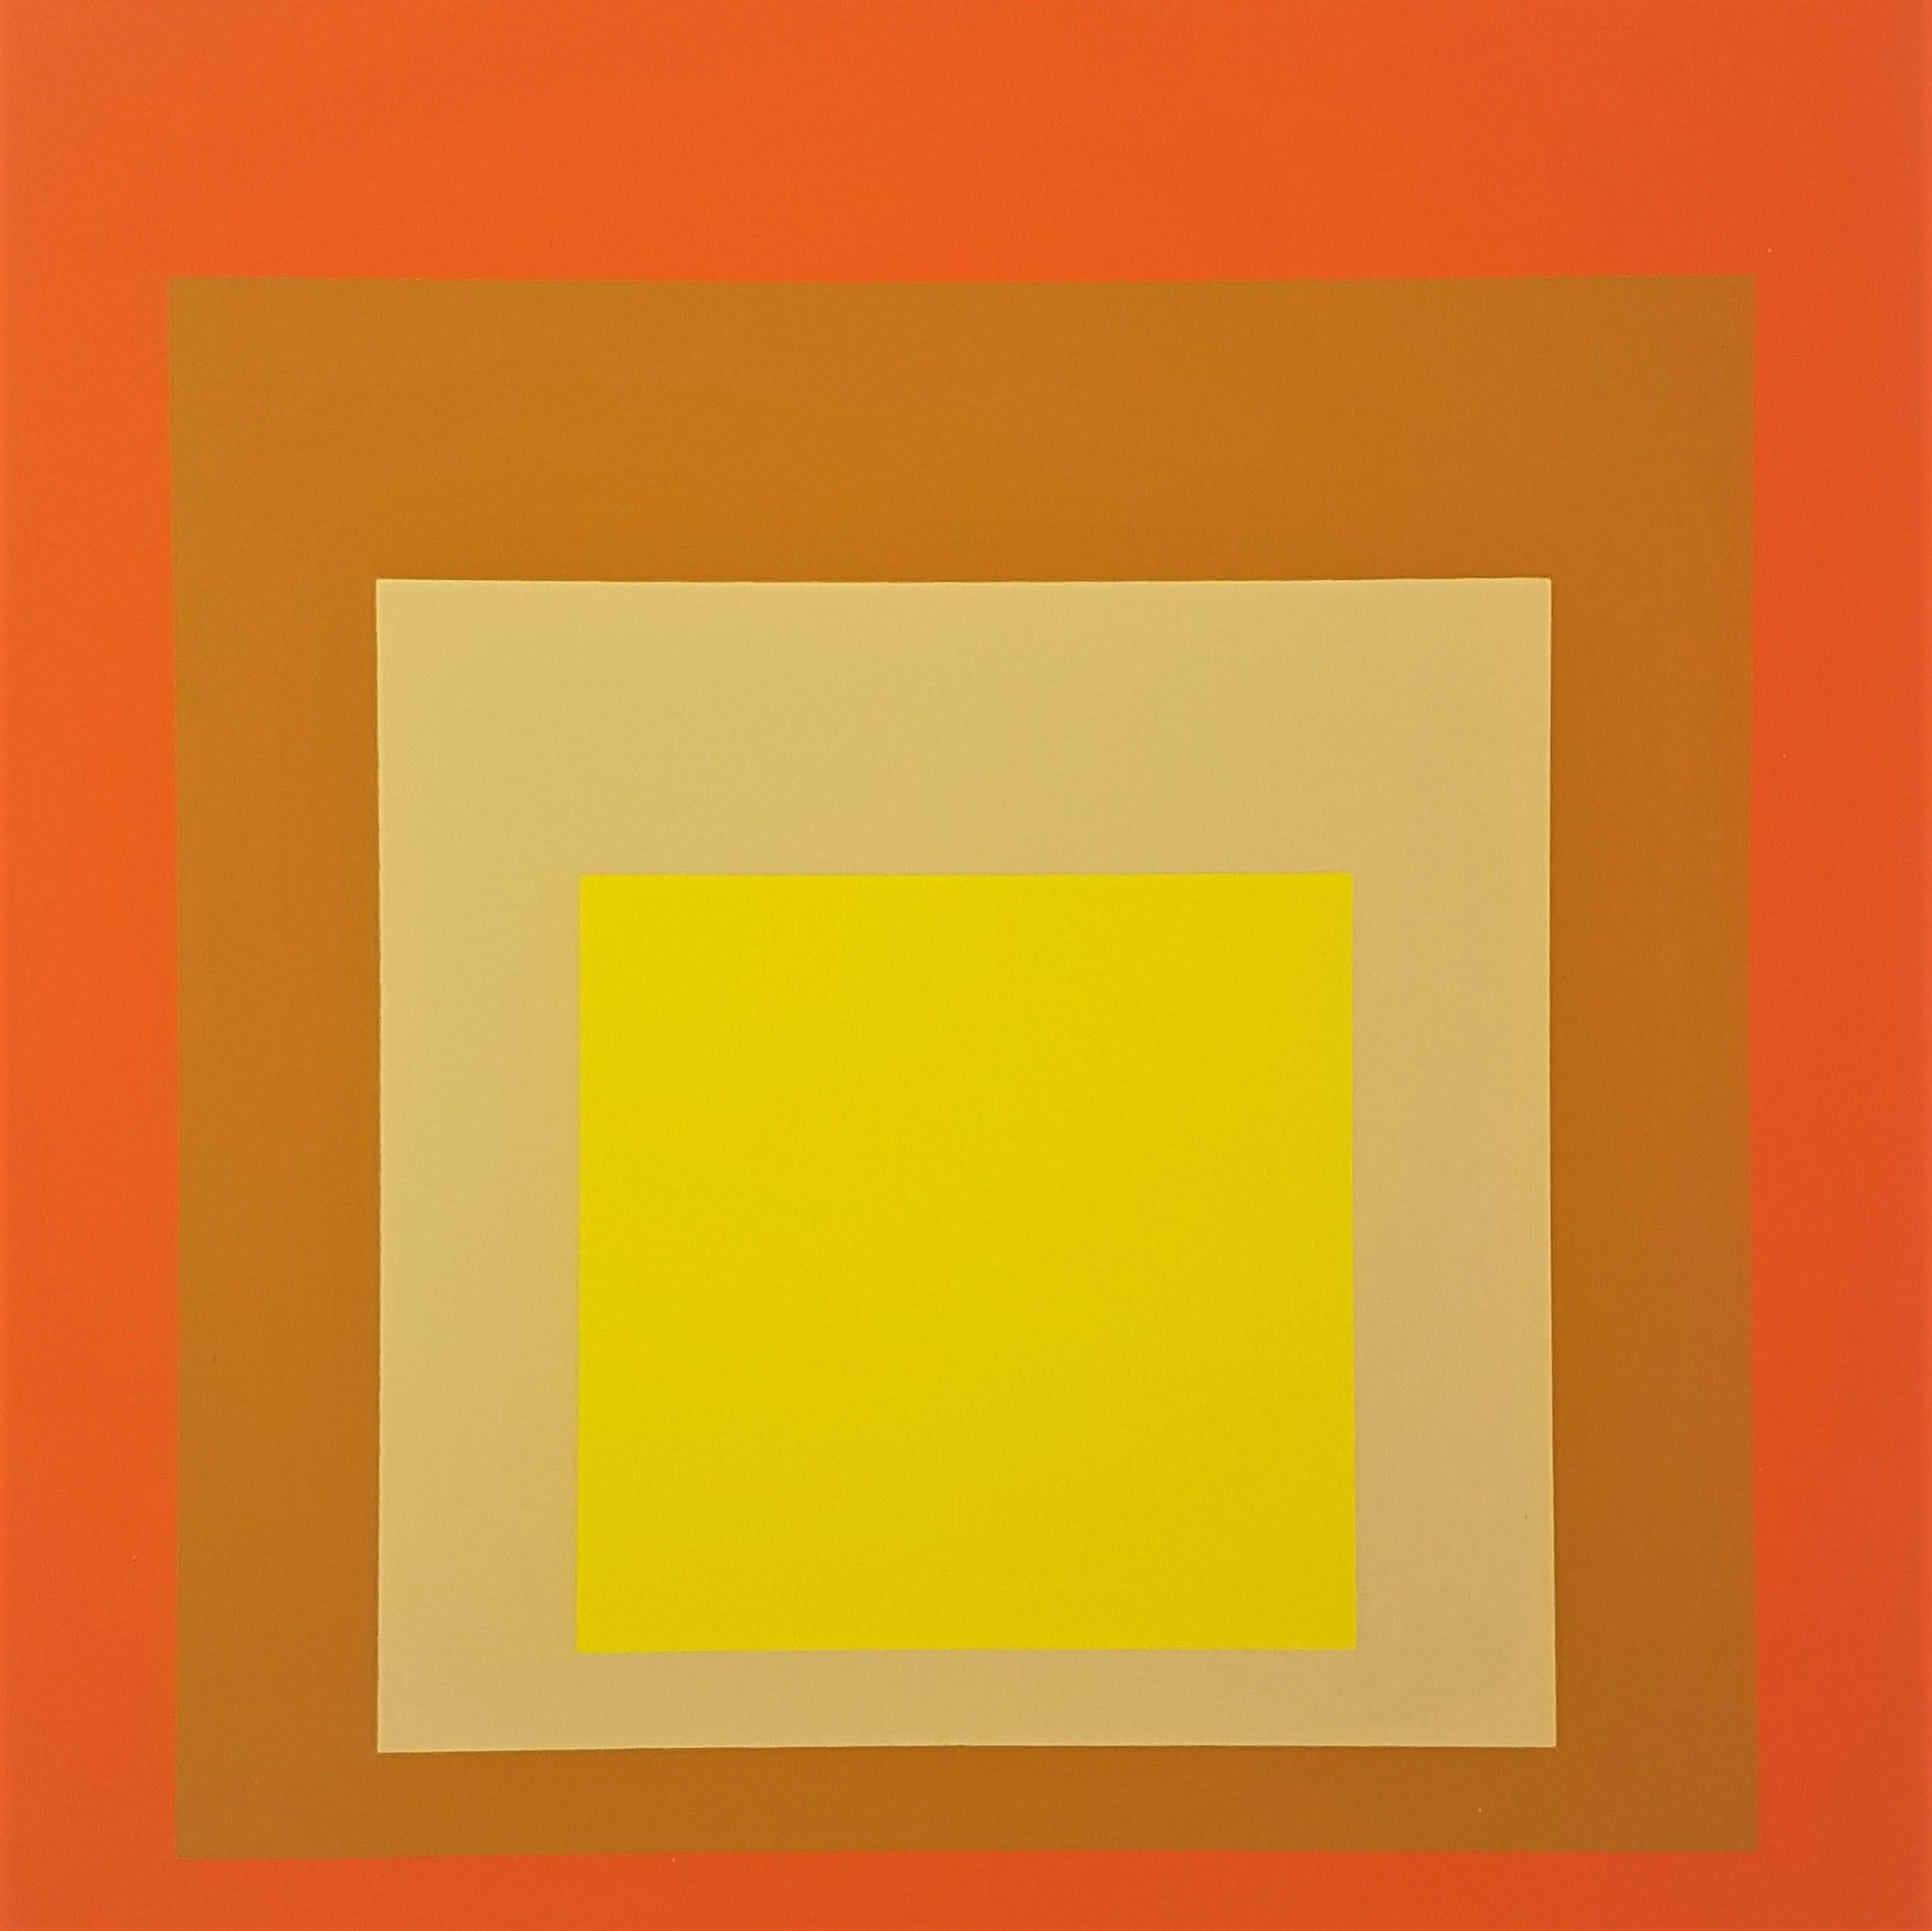 (after) Josef Albers Abstract Print - Homage to the Square: Yes Sir! (~28% OFF LIST PRICE - LIMITED TIME ONLY)